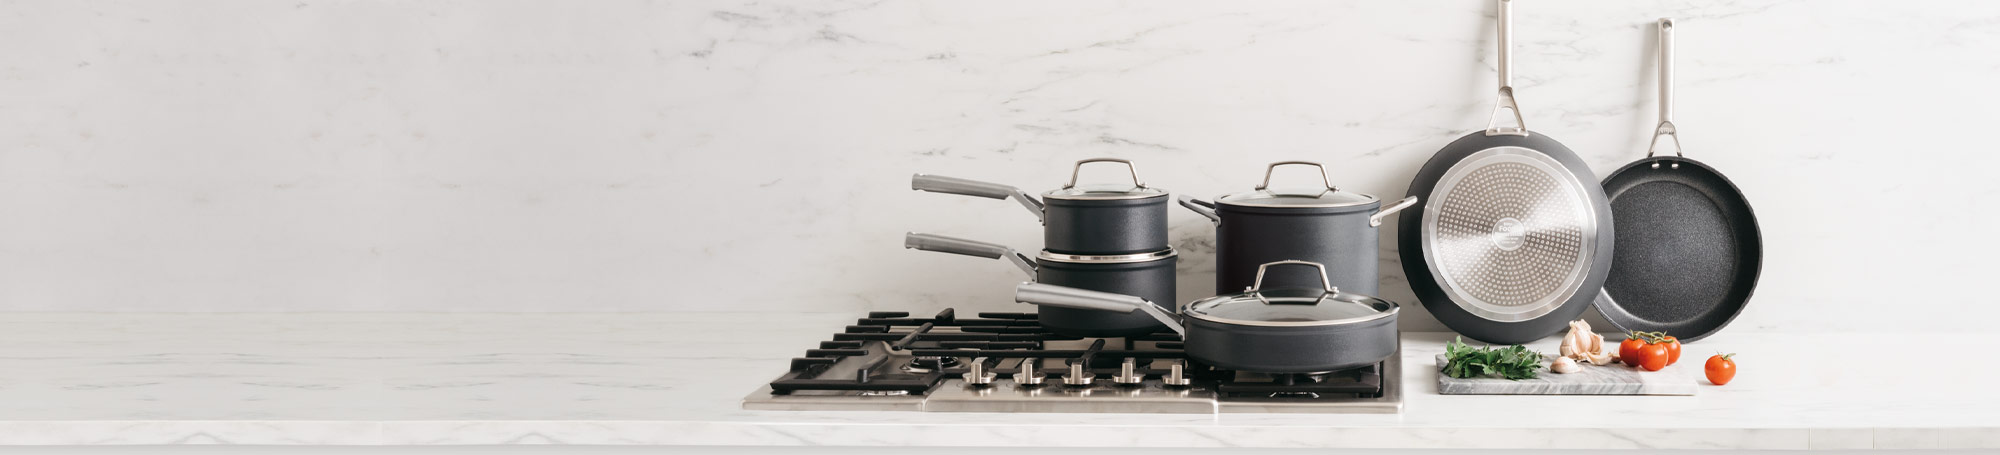 Gray cookware on stovetop and countertop